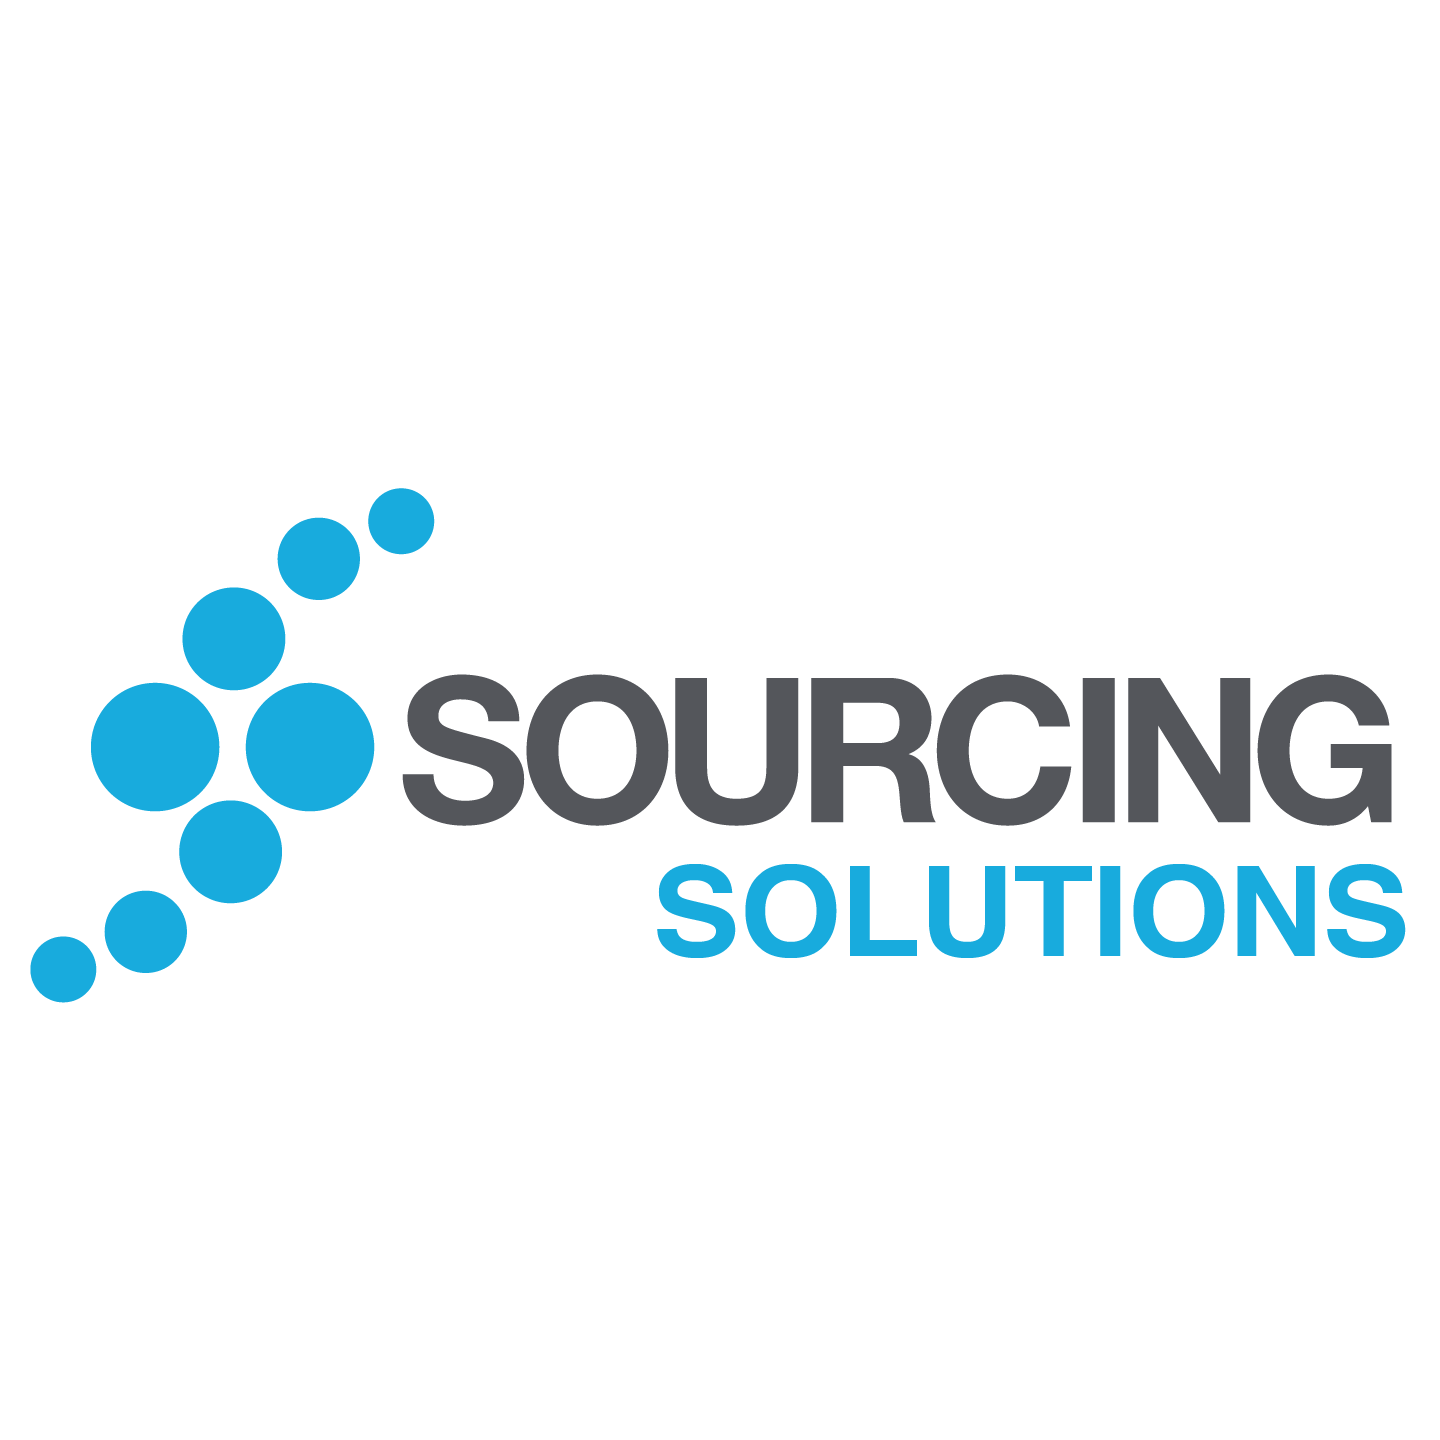 Sourcing Solutions logo